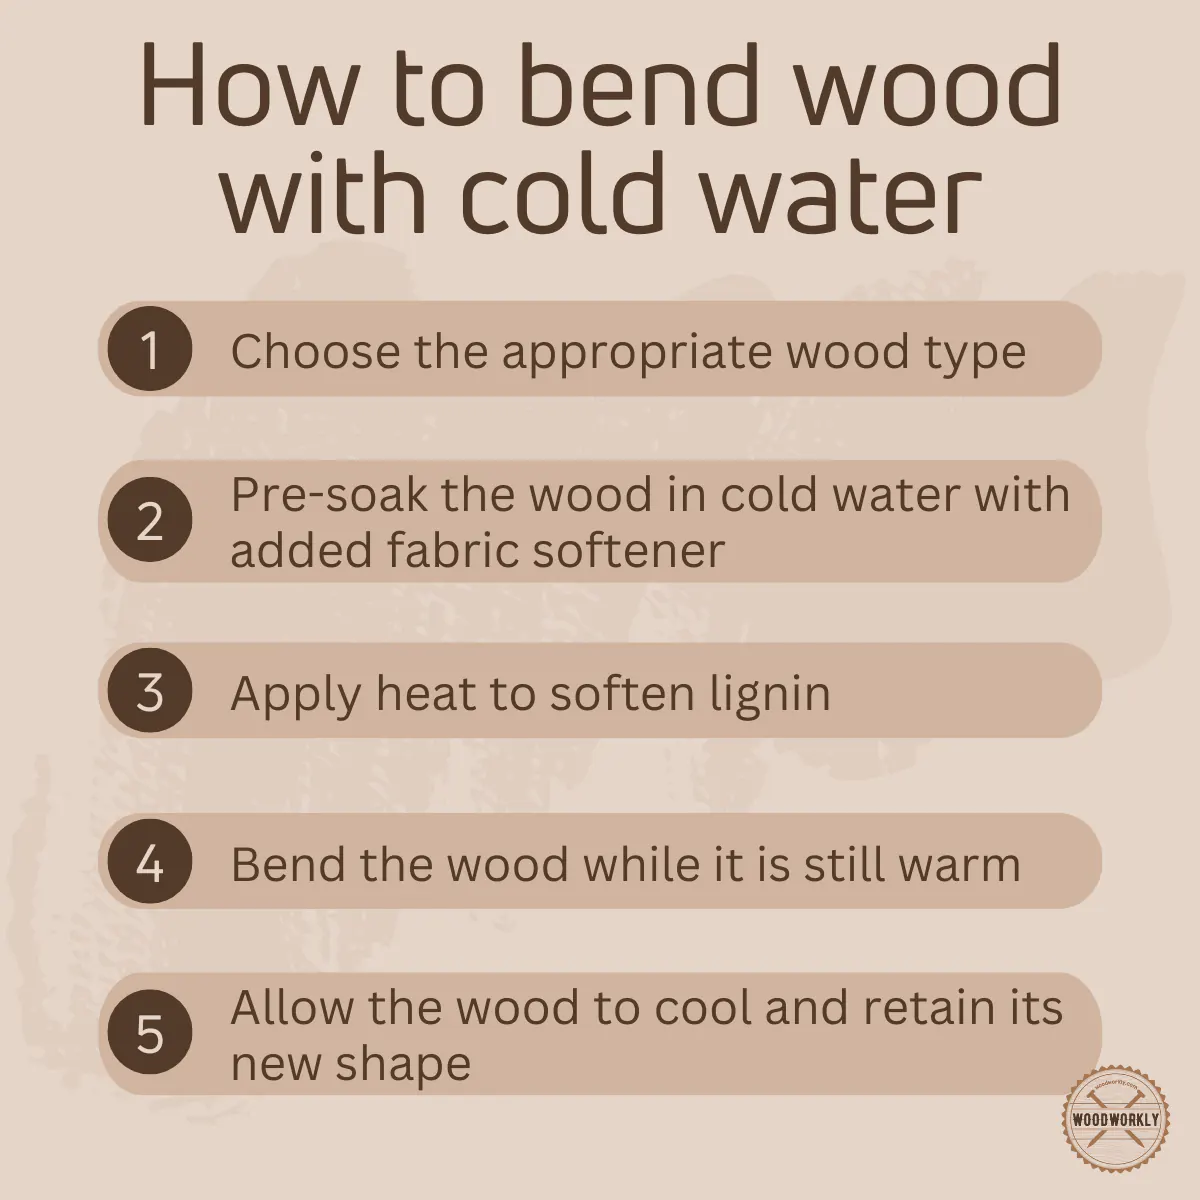 How to bend wood with cold water